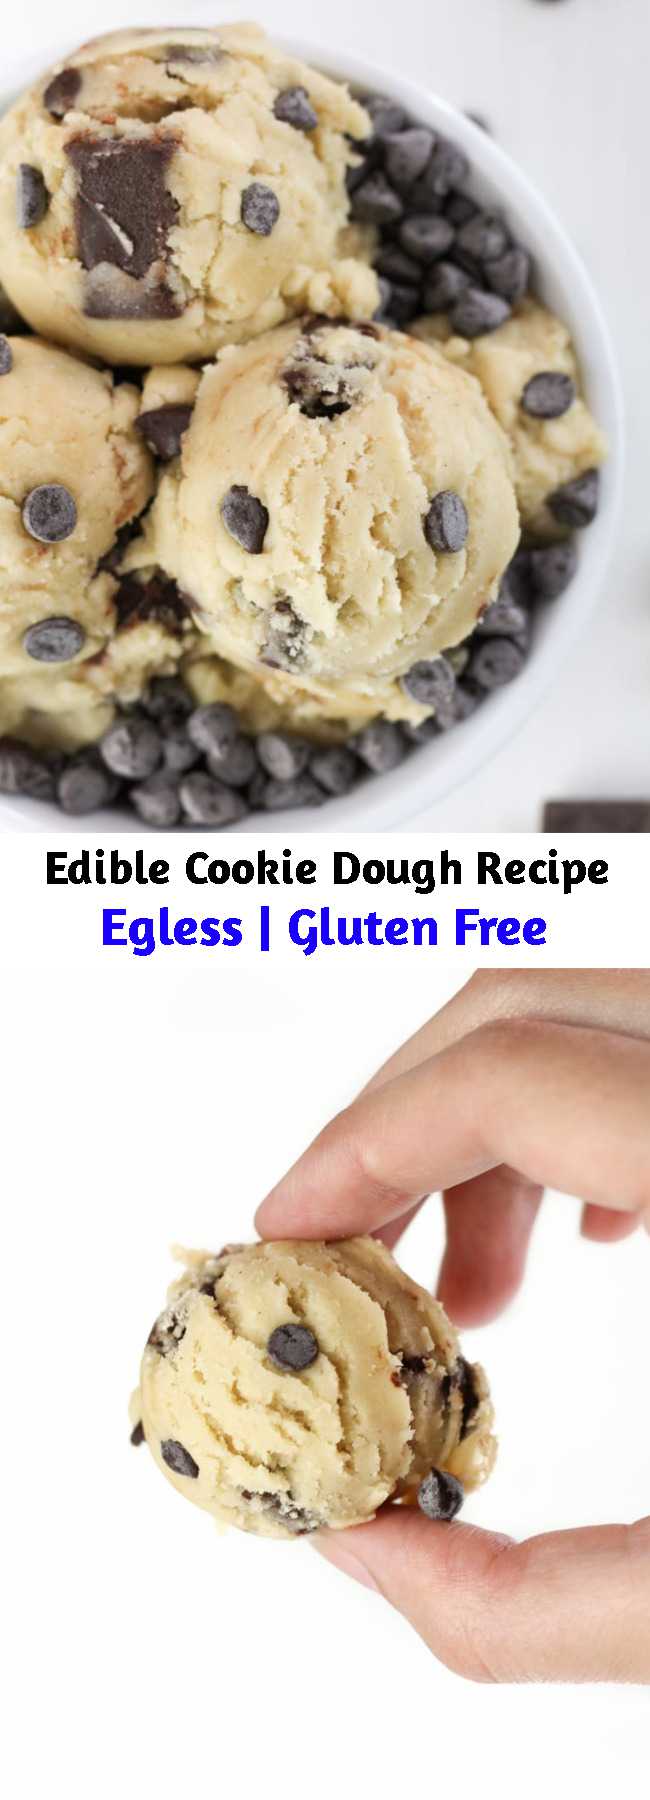 Edible Cookie Dough Recipe - Edible Cookie Dough recipe and How-To Make it Healthy, Gluten-Free, Dairy-Free and Lower-sugar! Making safe-to eat and egg-less cookie dough with just 7 simple ingredients and tips to baking the flour! Dreams do come true. #cookiedough #ediblecookiedough #glutenfree #healthy #healthydessert #glutenfreedessert #recipes #desserts #easyrecipes